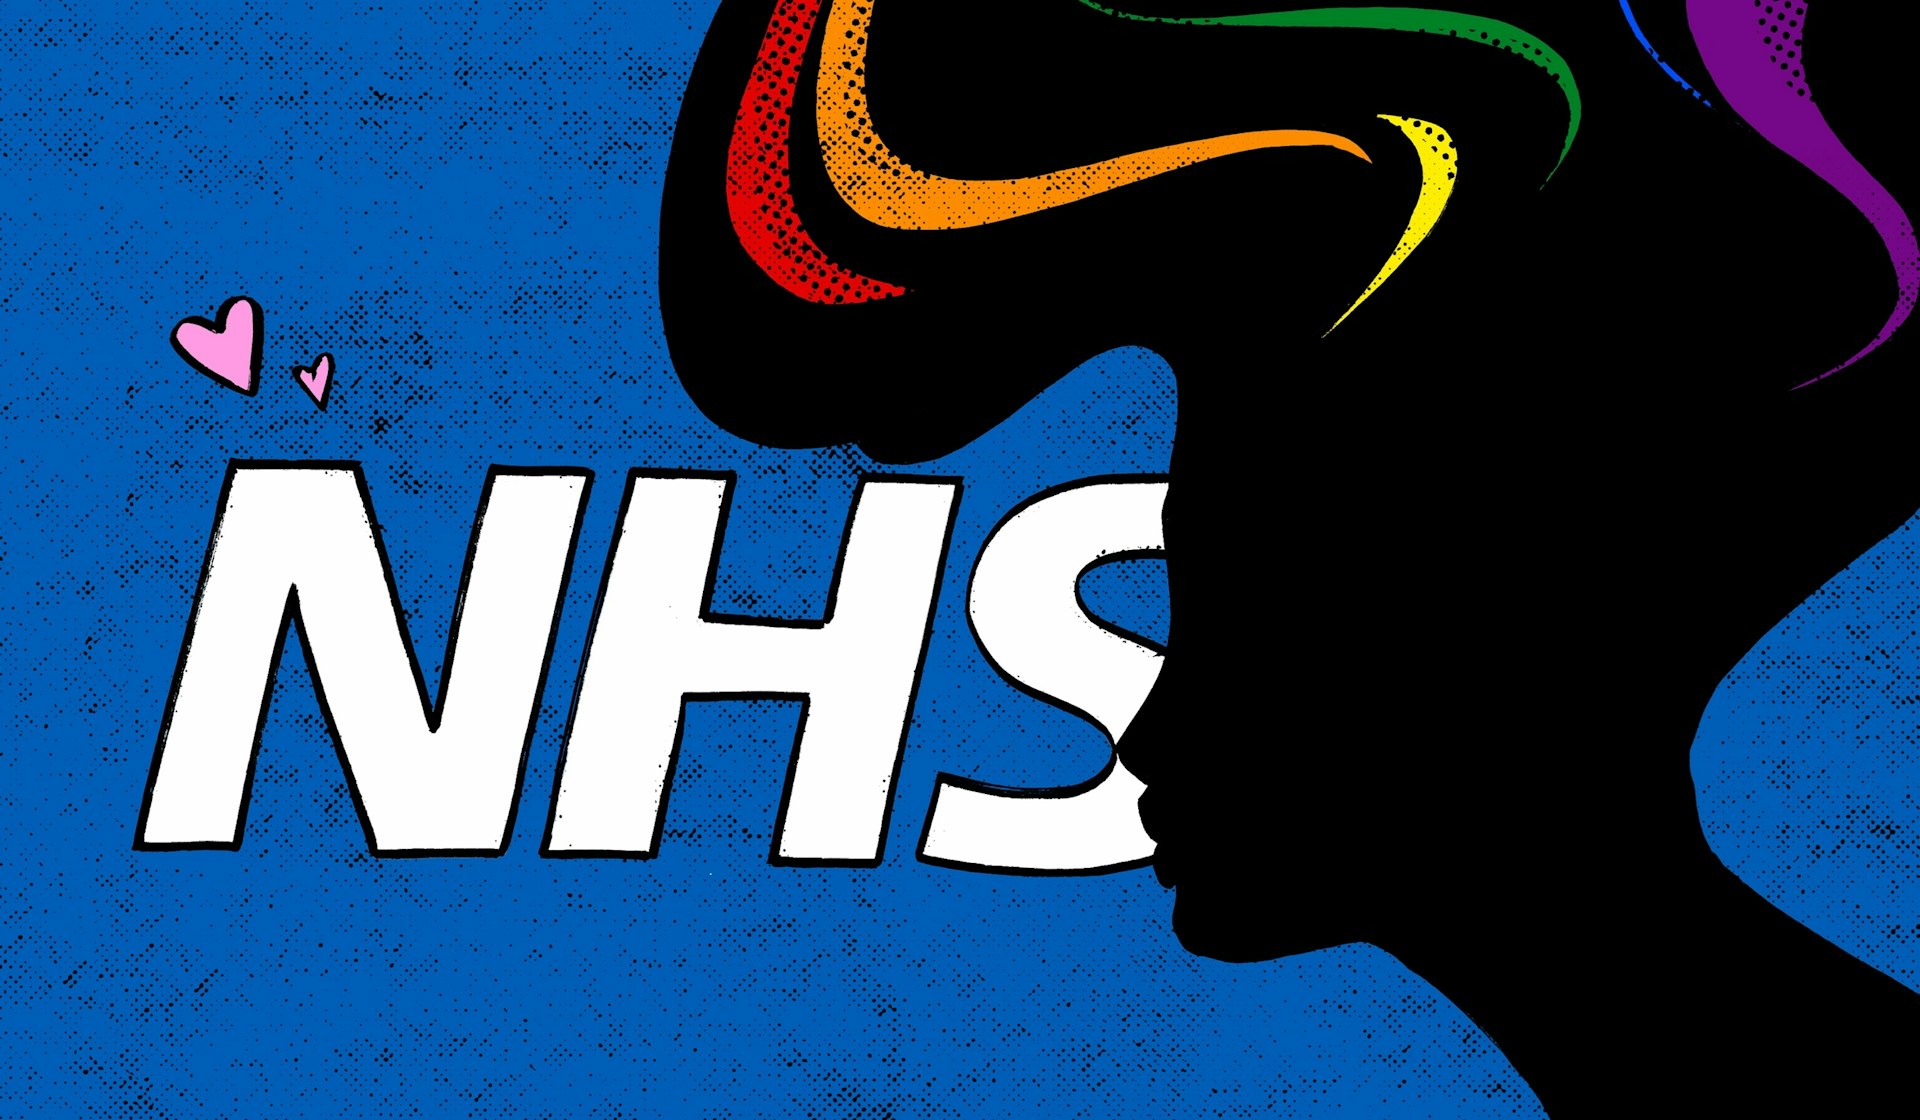 A trans woman shares her love letter to the NHS